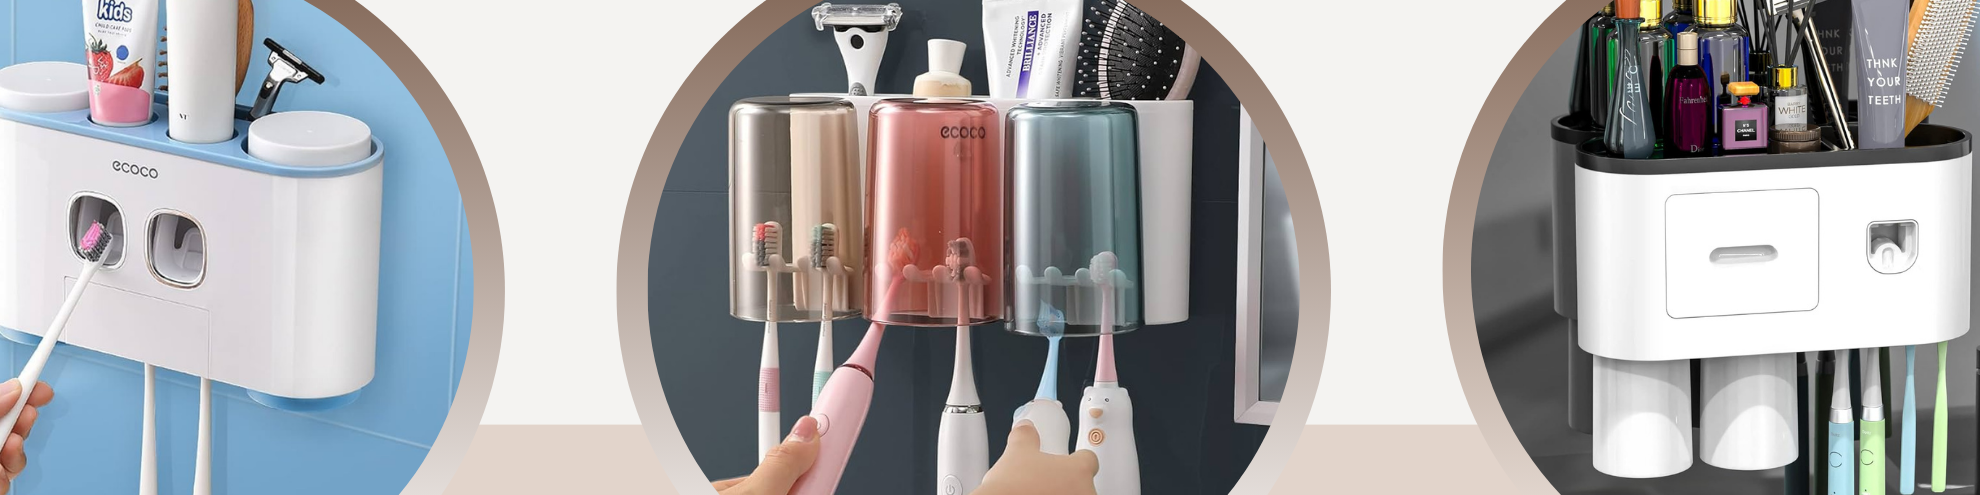 HY decoration Toothbrush Holders